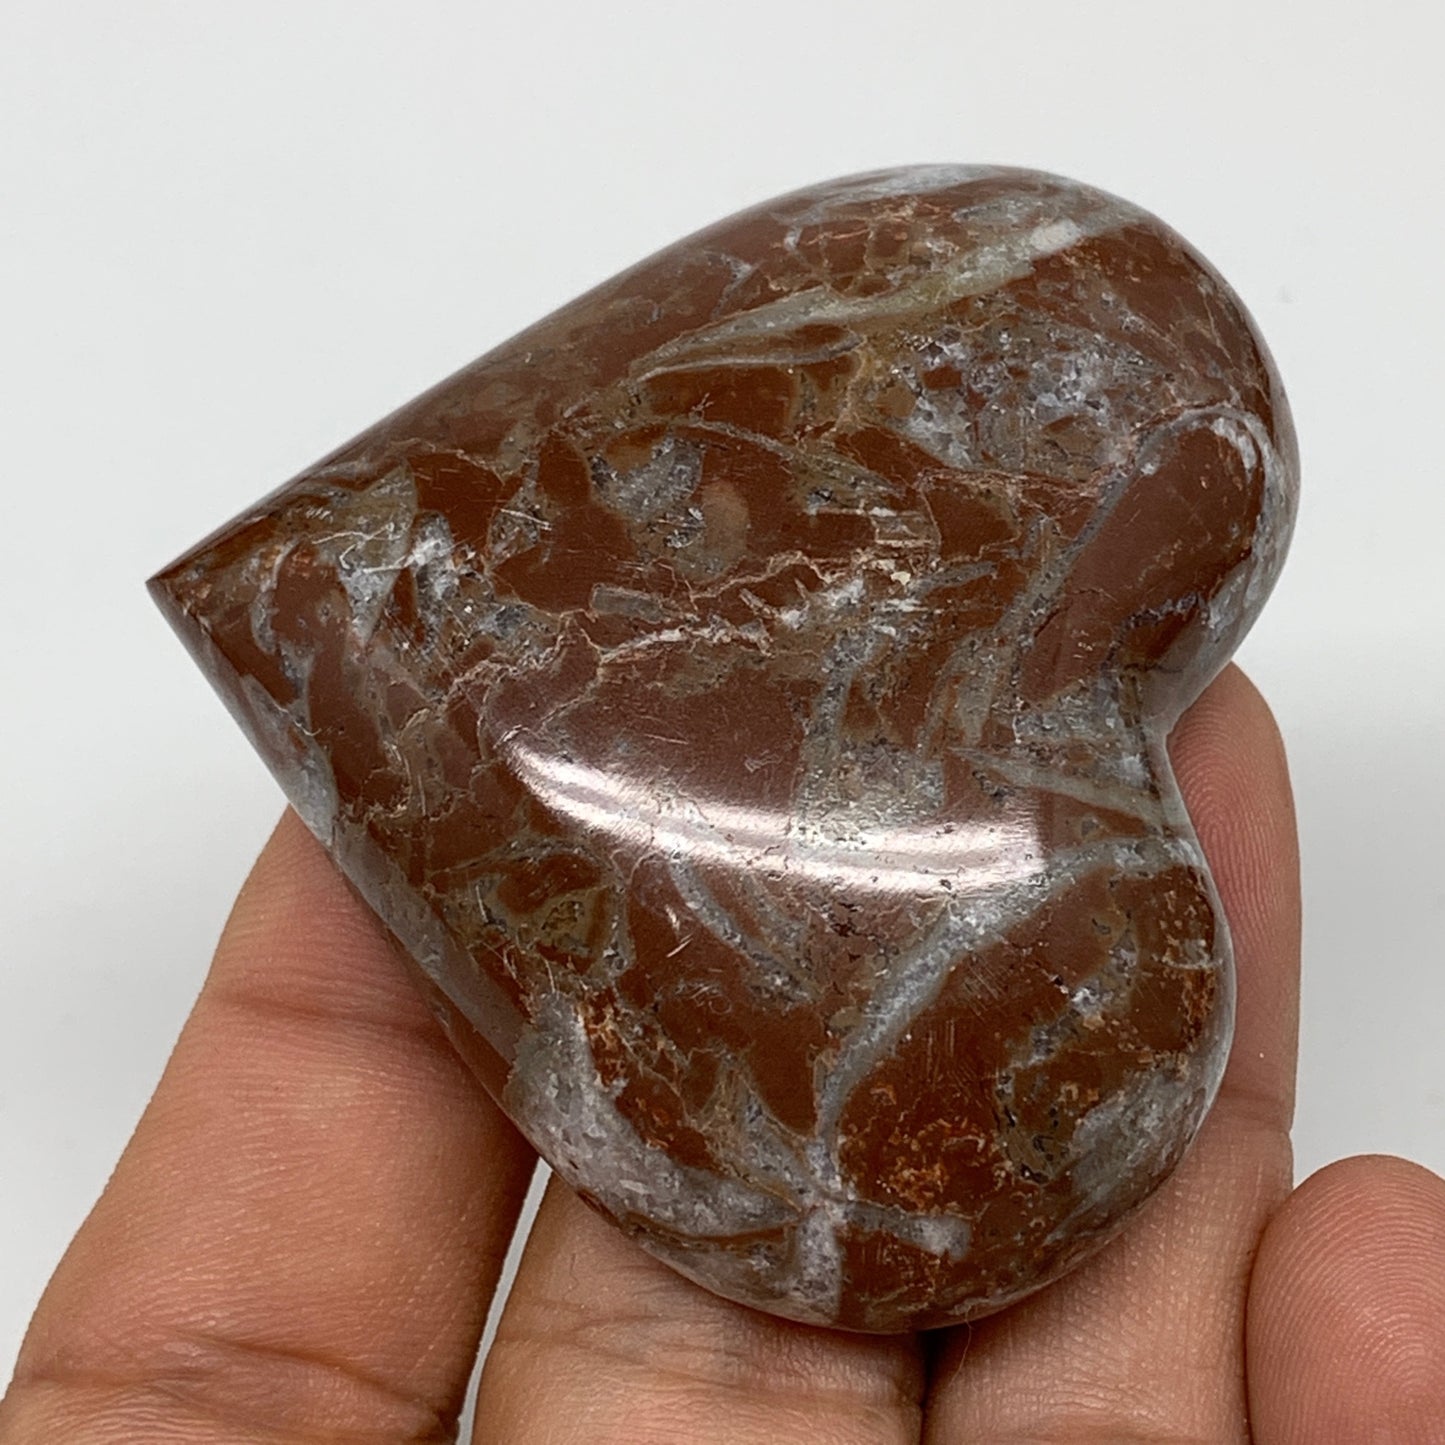 61.4g, 2" x 2.2"x 0.6", Natural Untreated Red Shell Fossils Half Heart @Morocco,